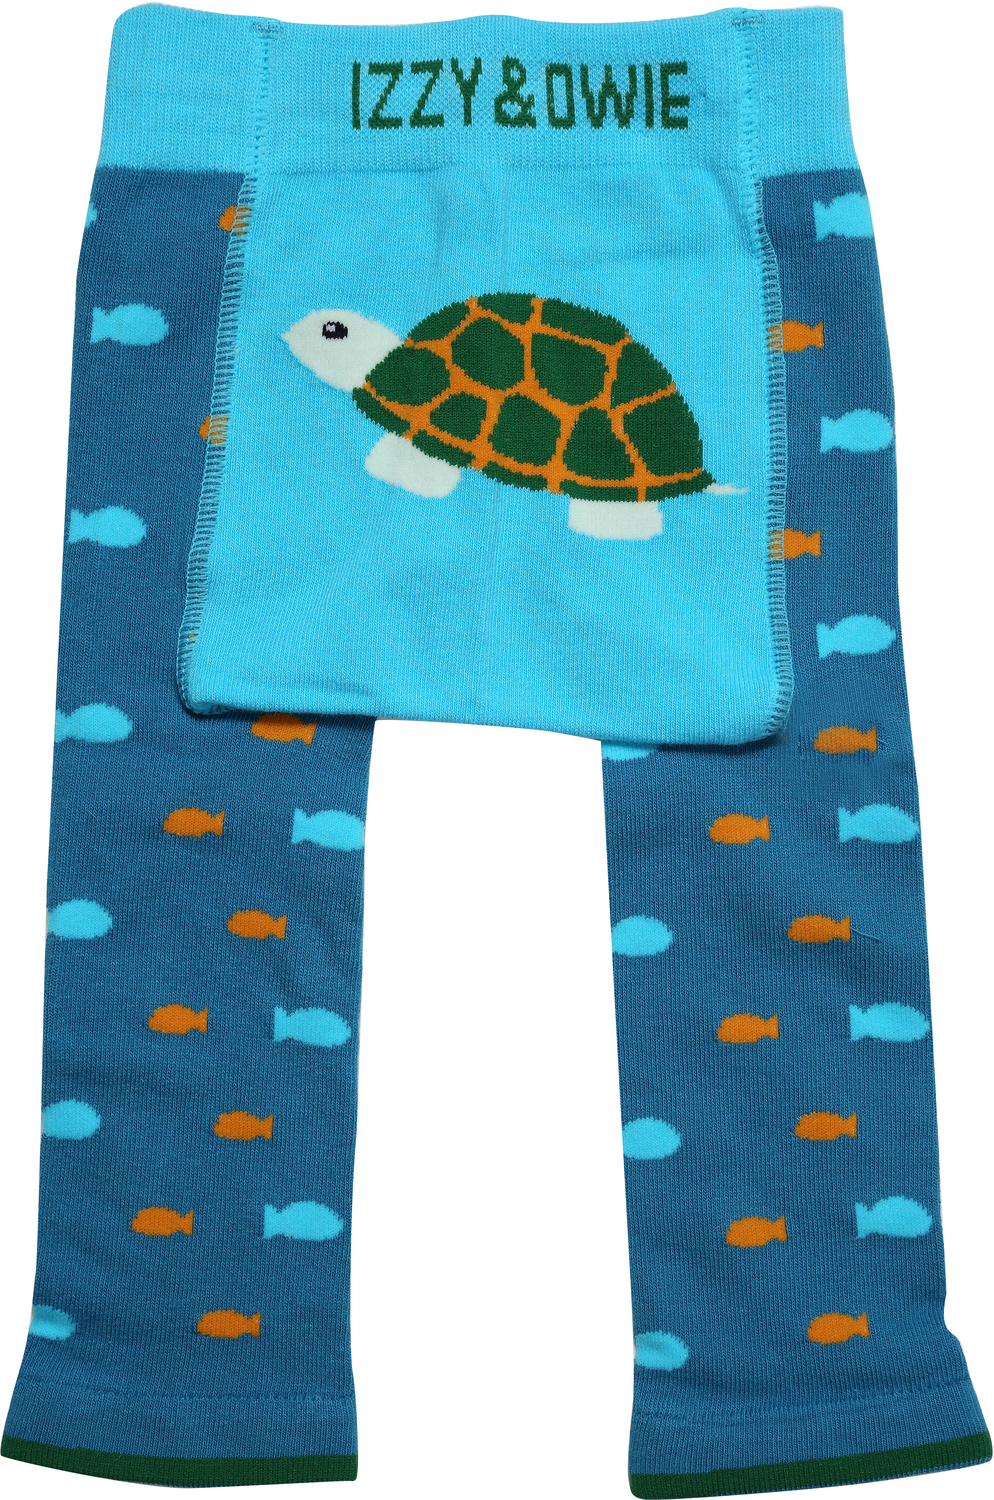 Green Turtle by Izzy & Owie - Green Turtle - 6-12 Months Baby Leggings